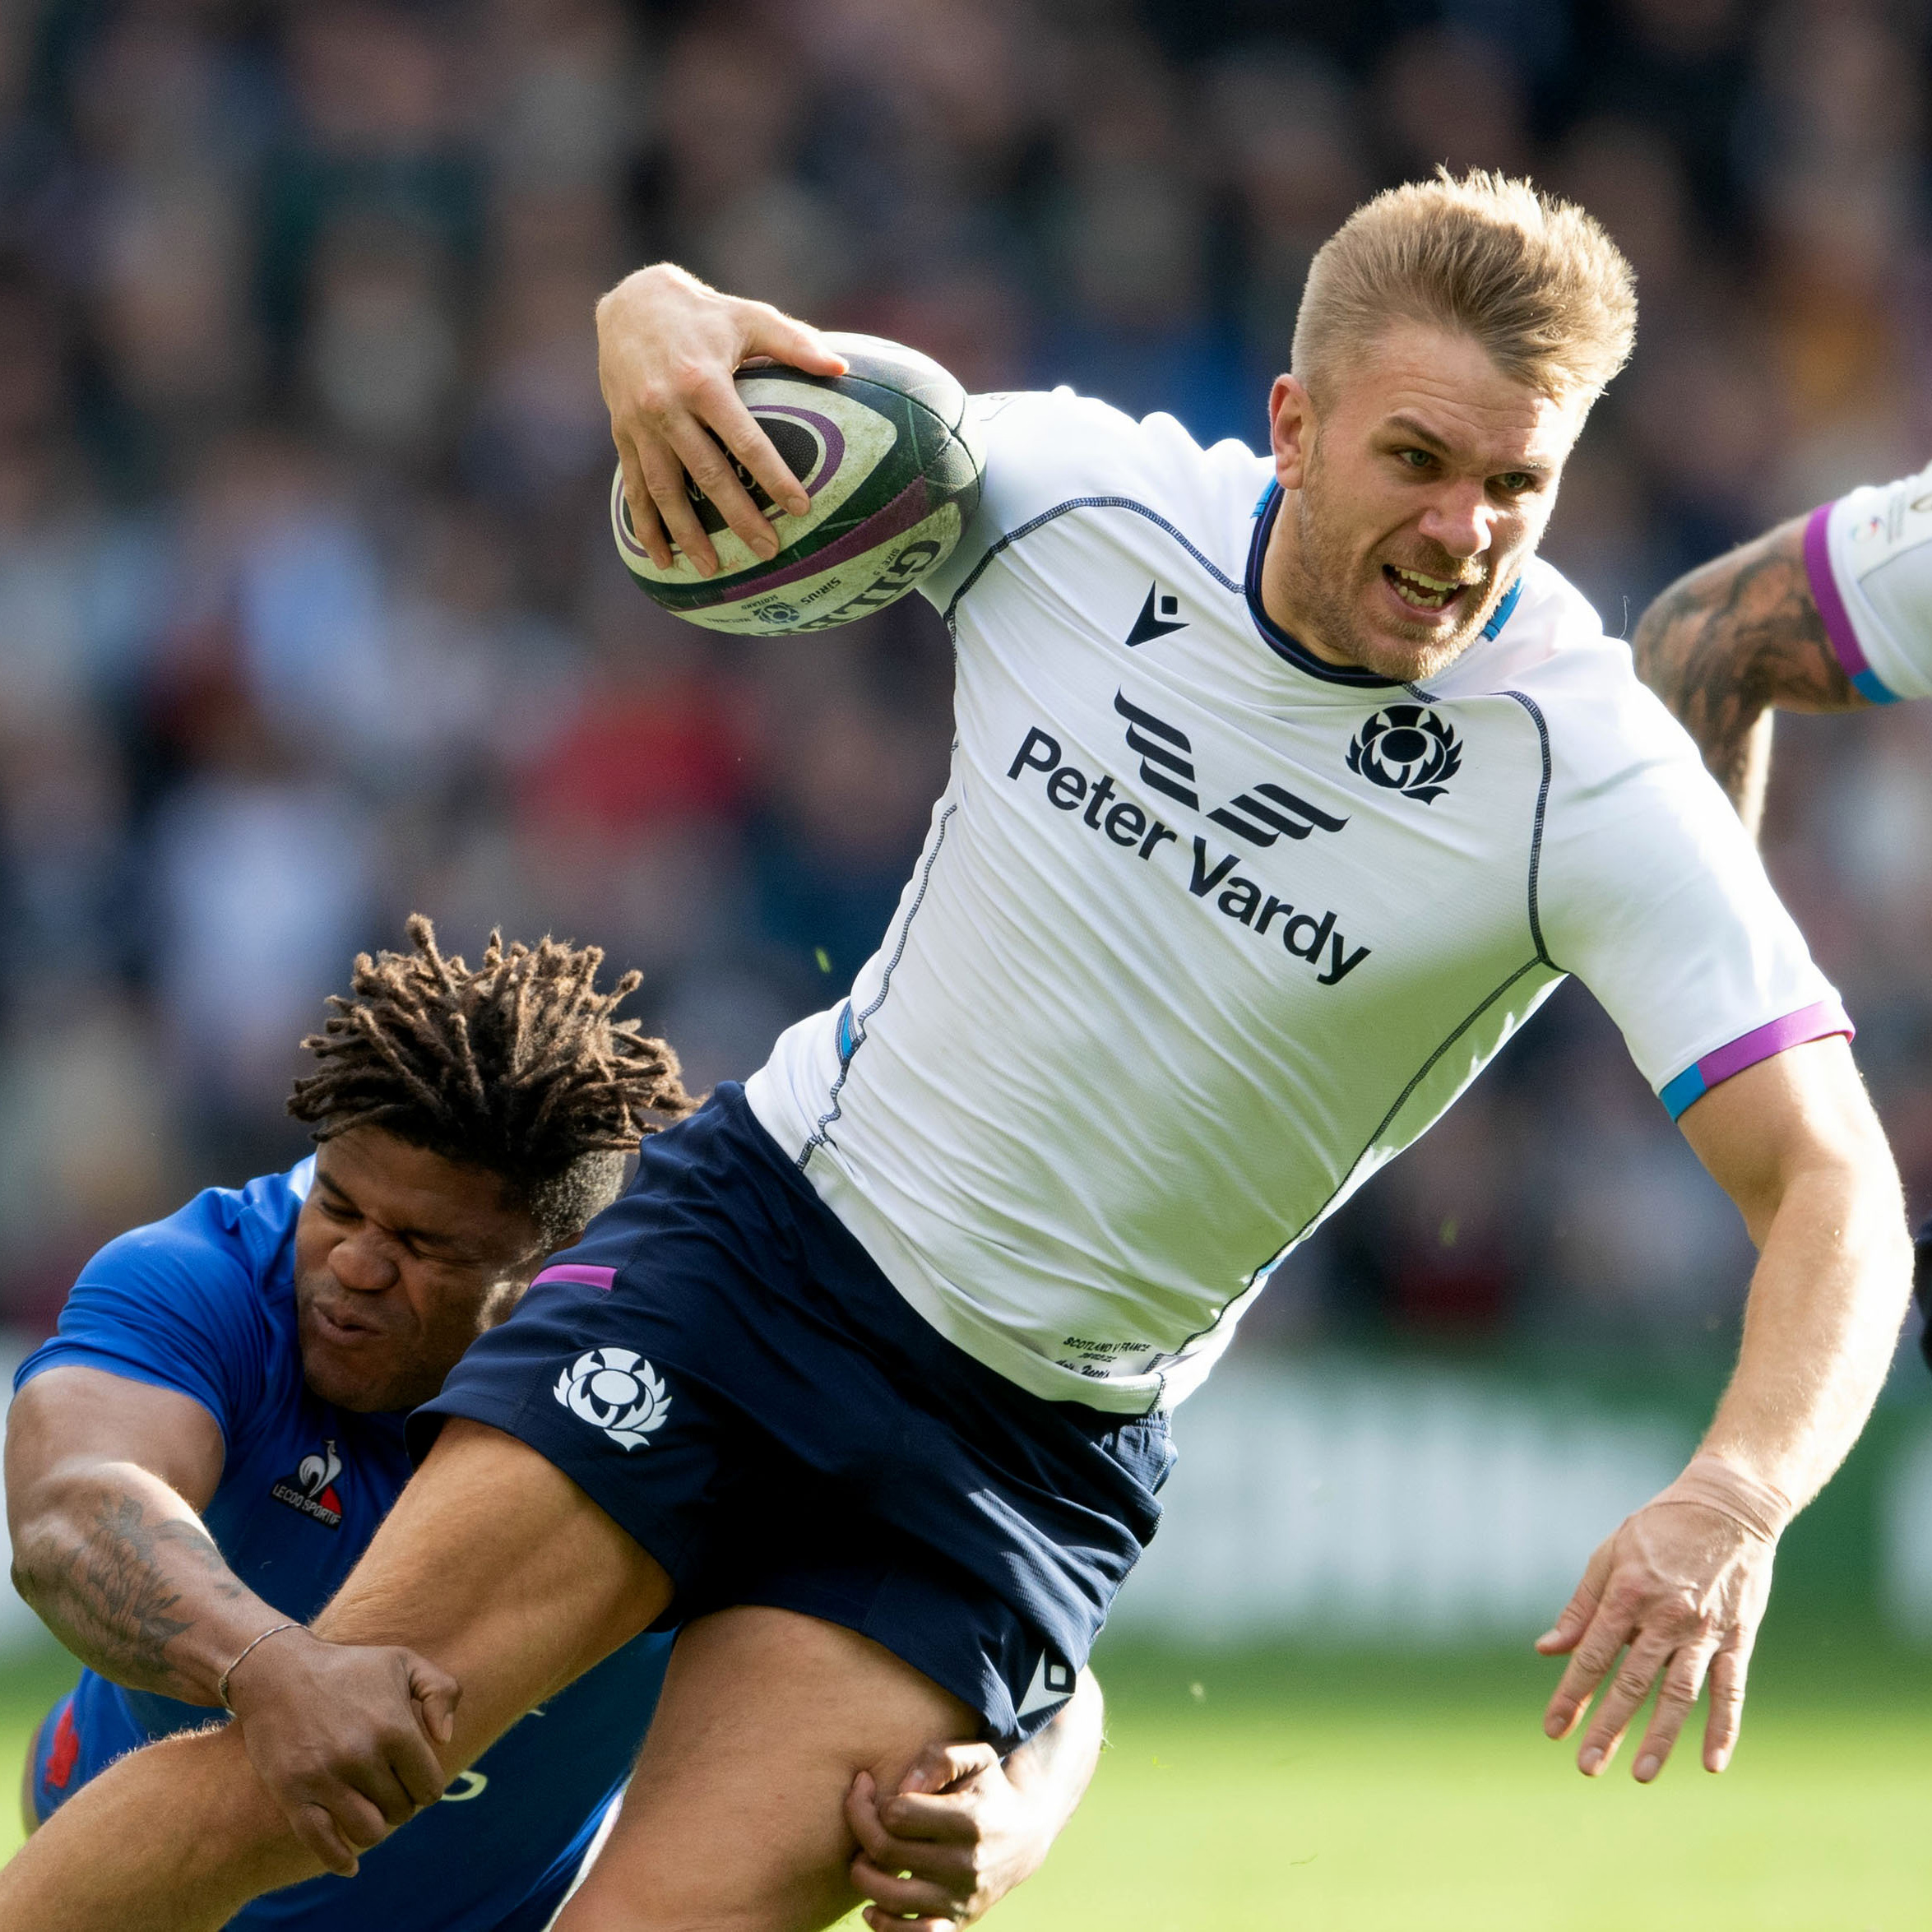 Fuelling Scotland During the Guinness Six Nations: A Day in the Life